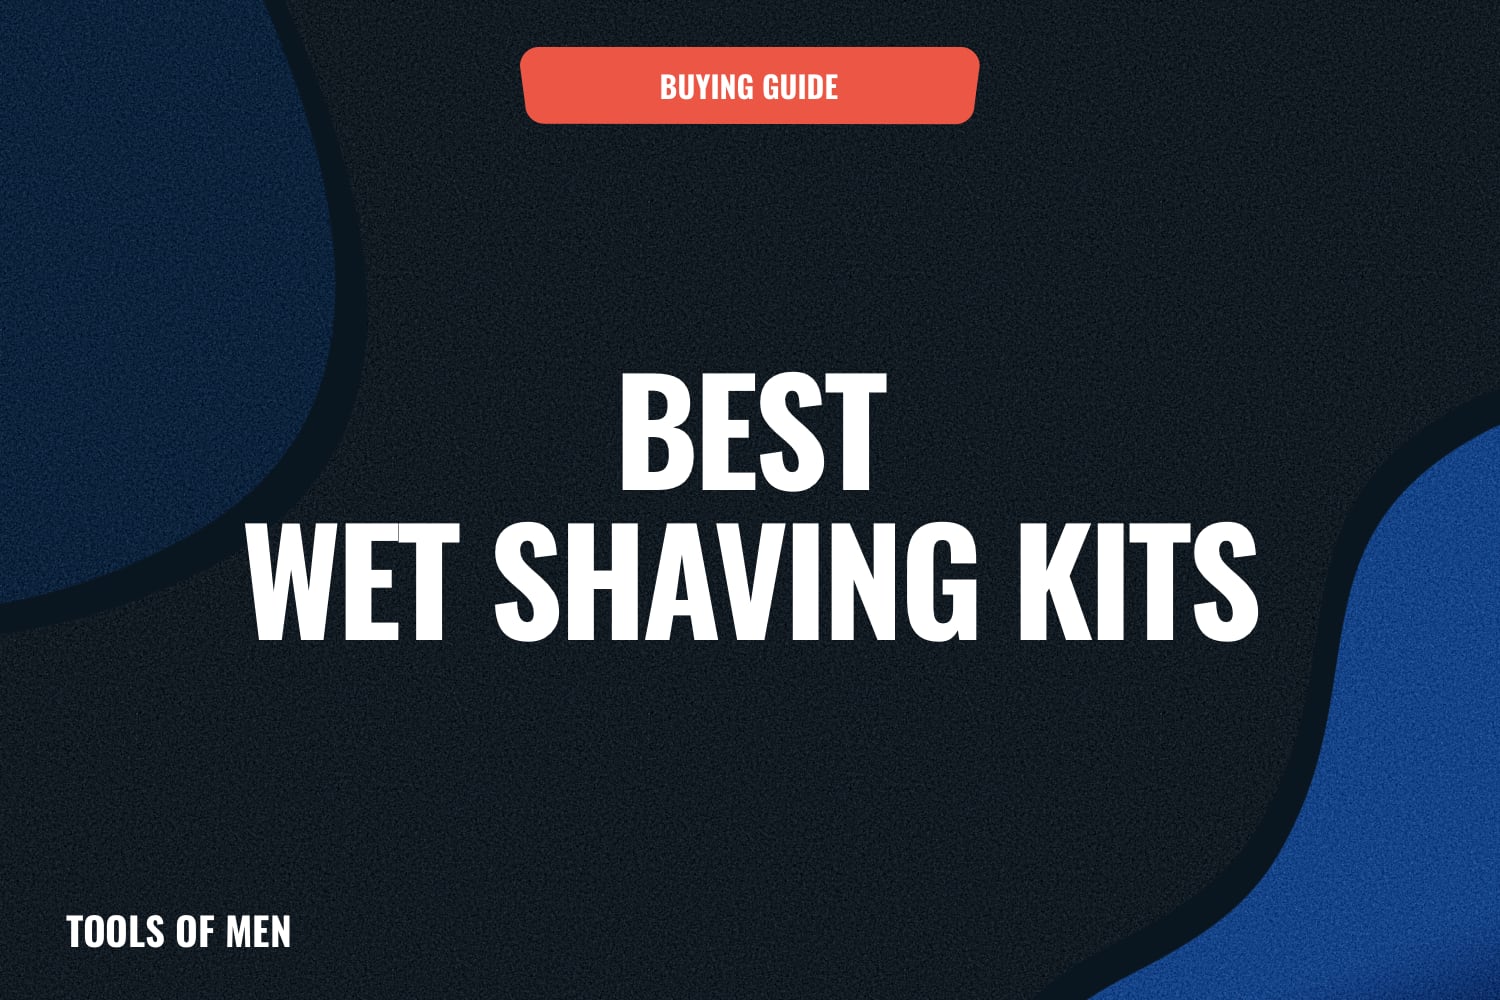 generic feature image for shaving kits article